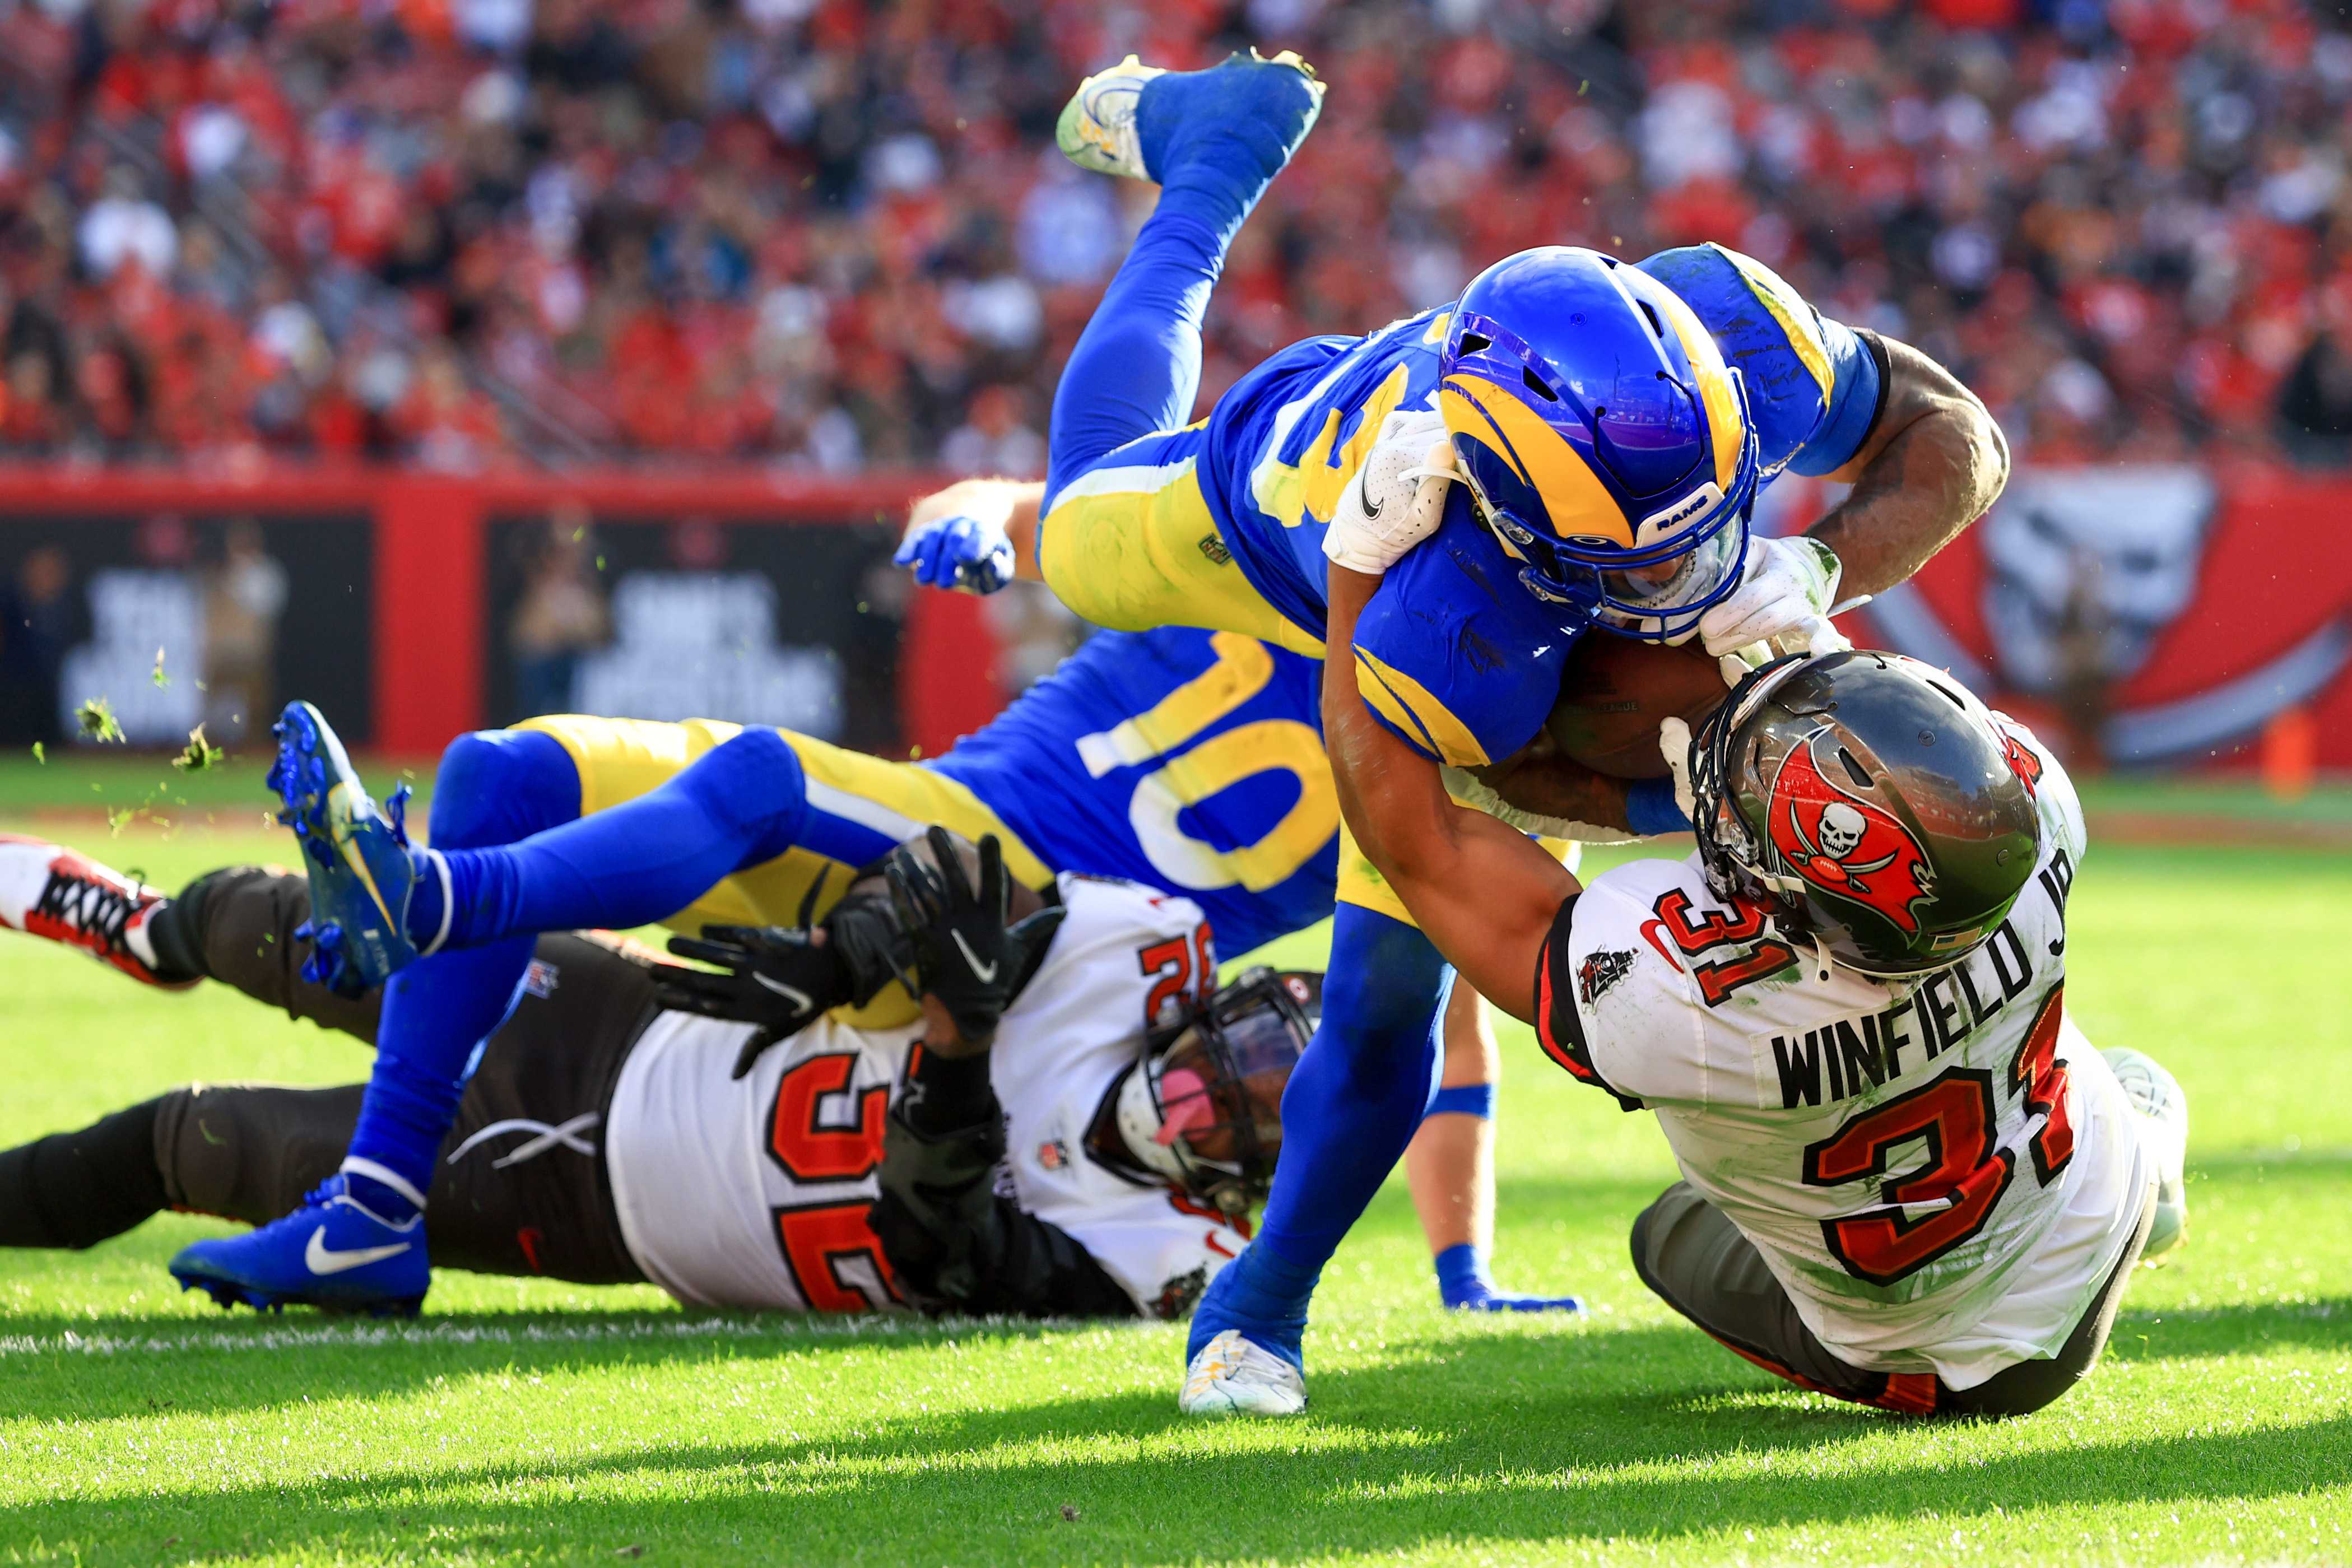 2021 NFL playoffs: What to watch for in Rams-Buccaneers Divisional